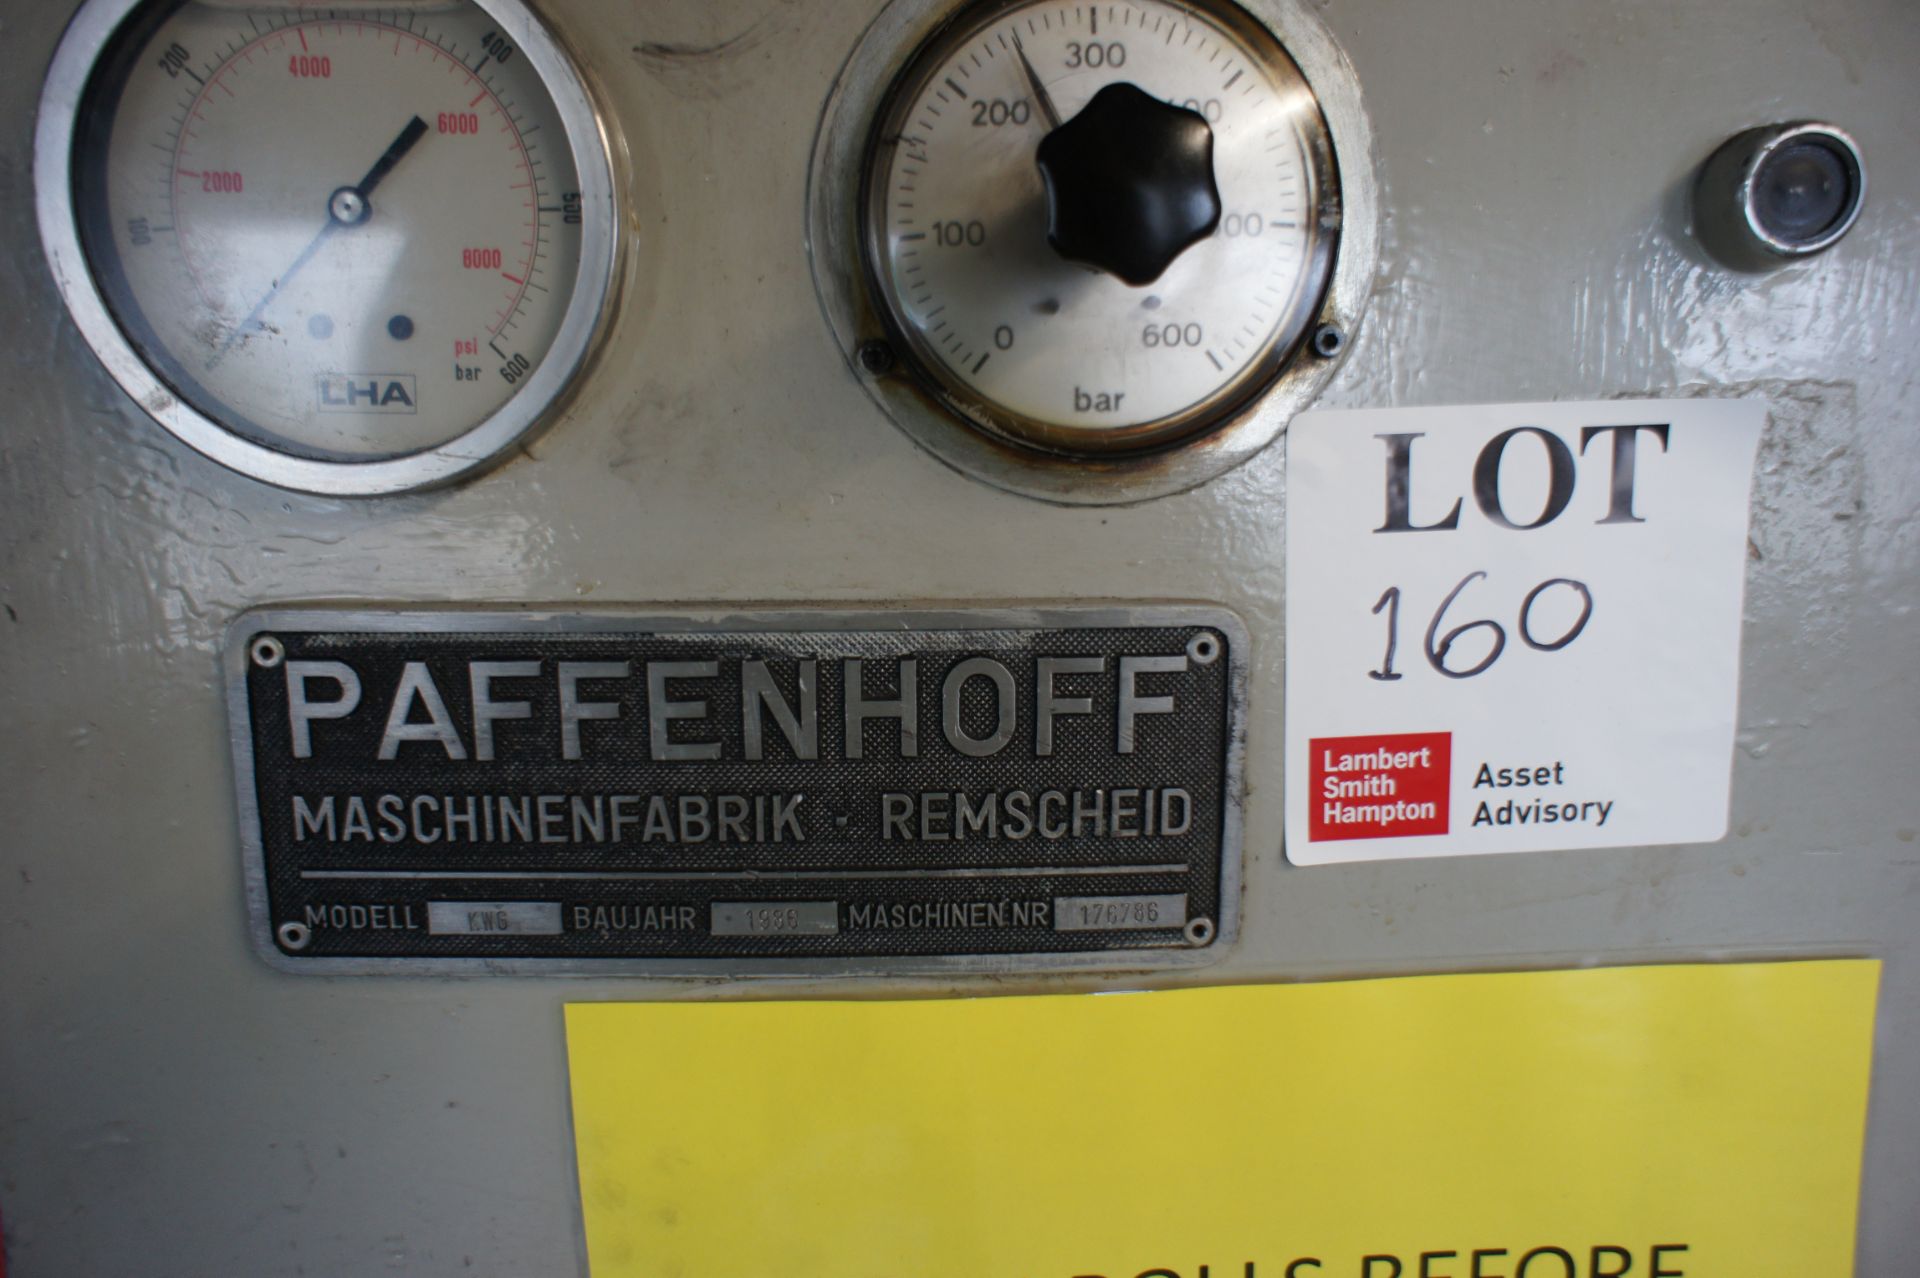 Paffenhoff KWG tension rolling machine - Image 3 of 6